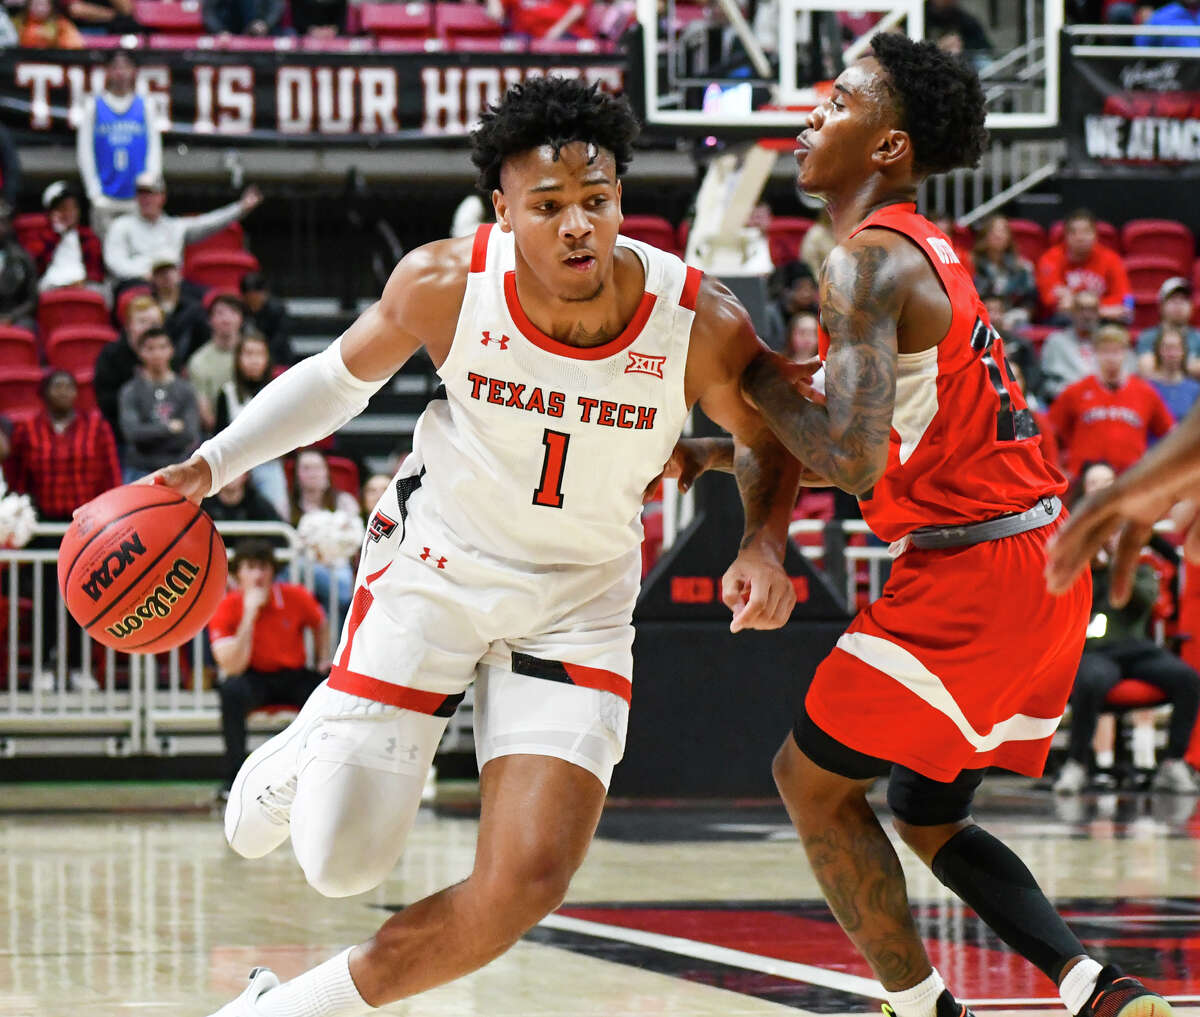 Texas Tech's Terrence Shannon, Jr. tries to get by Lamar defender Davion Buster during their men's college basketball game on Saturday in United Supermarkets Arena at Lubbock. 